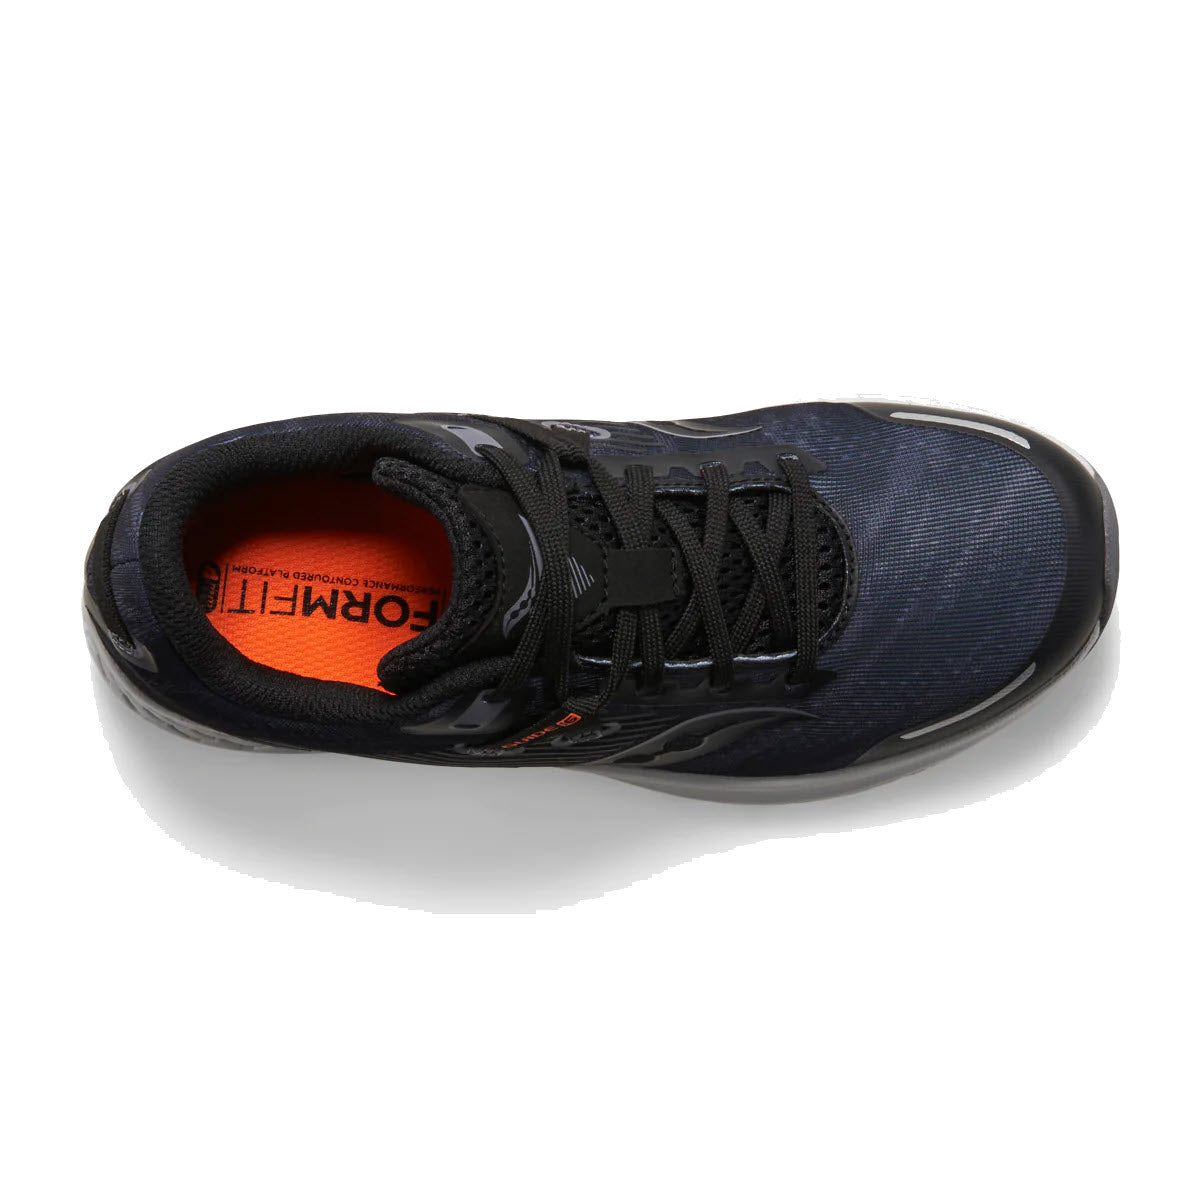 Top view of a black and blue Saucony Guide 16 running shoe with orange insole and black laces on a white background.